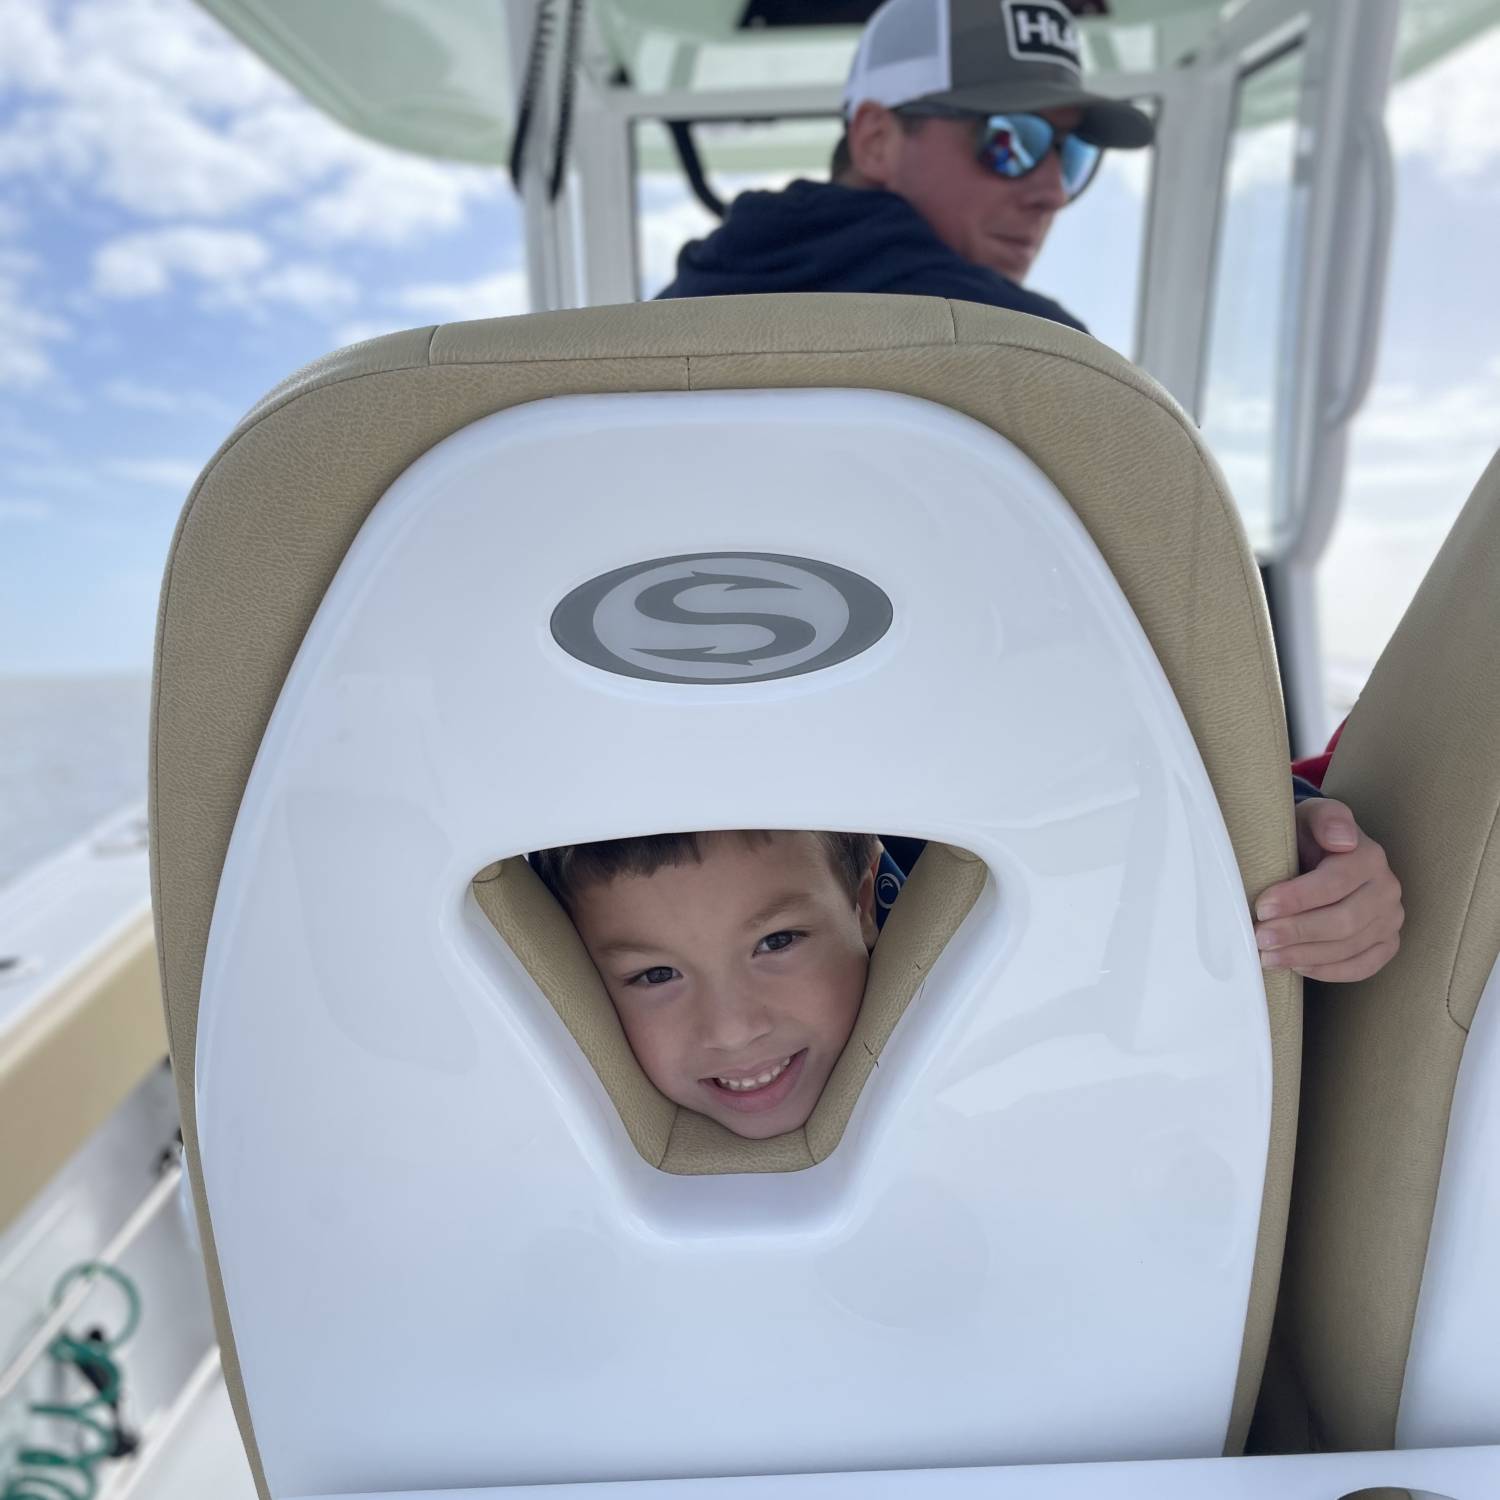 Title: Love those captains chairs - On board their Sportsman Open 262 Center Console - Location: Virginia Beach. Participating in the Photo Contest #SportsmanNovember